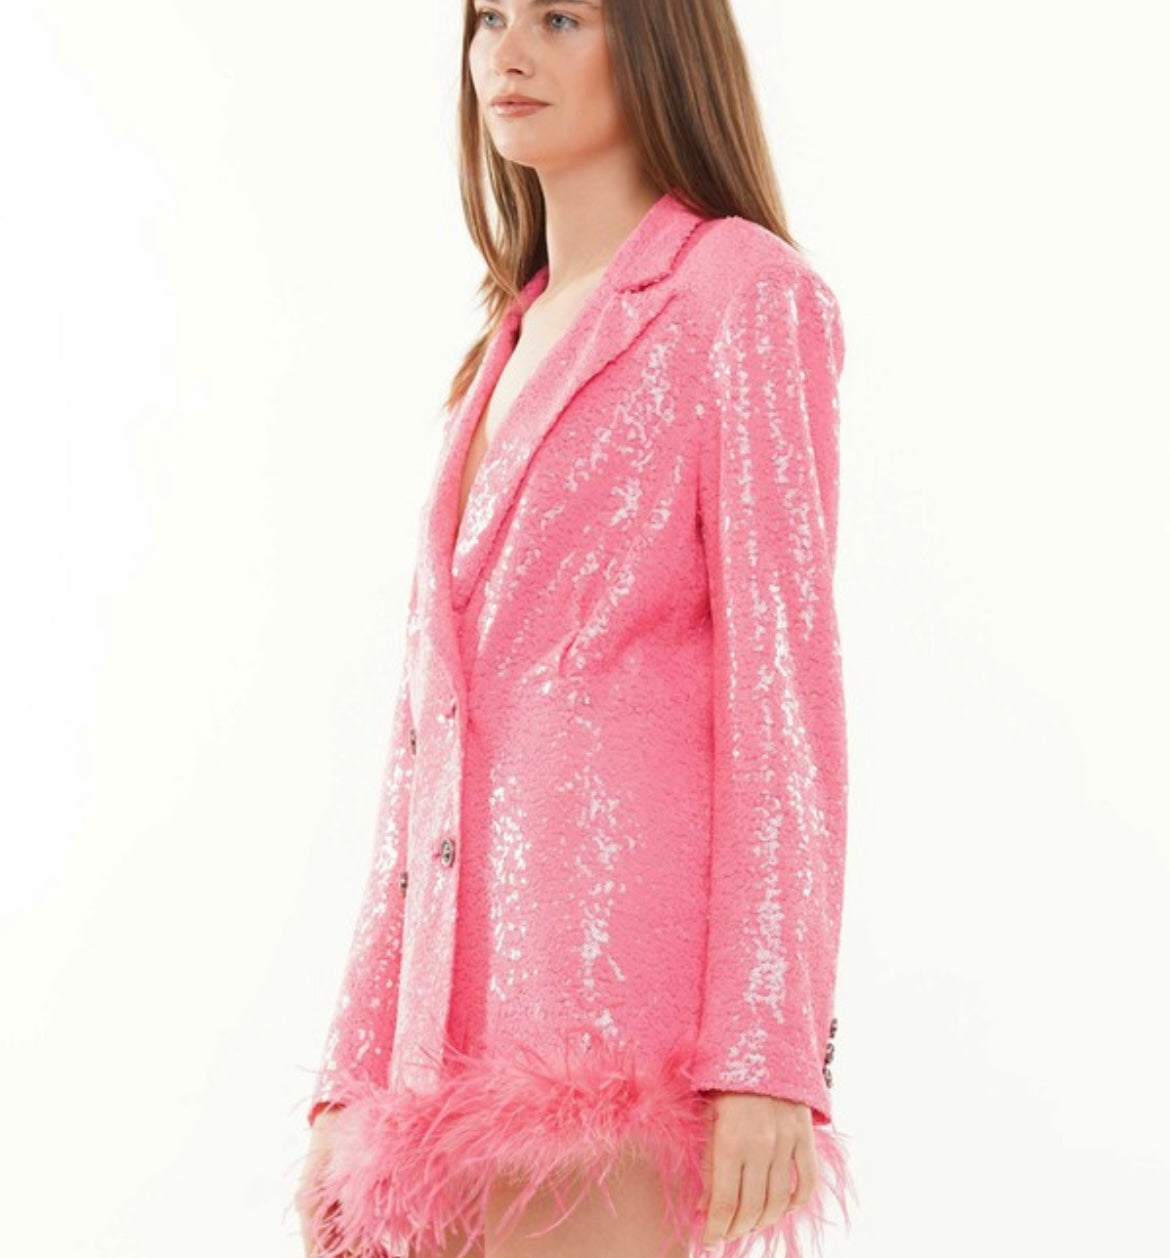 PINK SPARKLY SEQUIN BLAZER/DRESS EMBELLISHED WITH FAUX